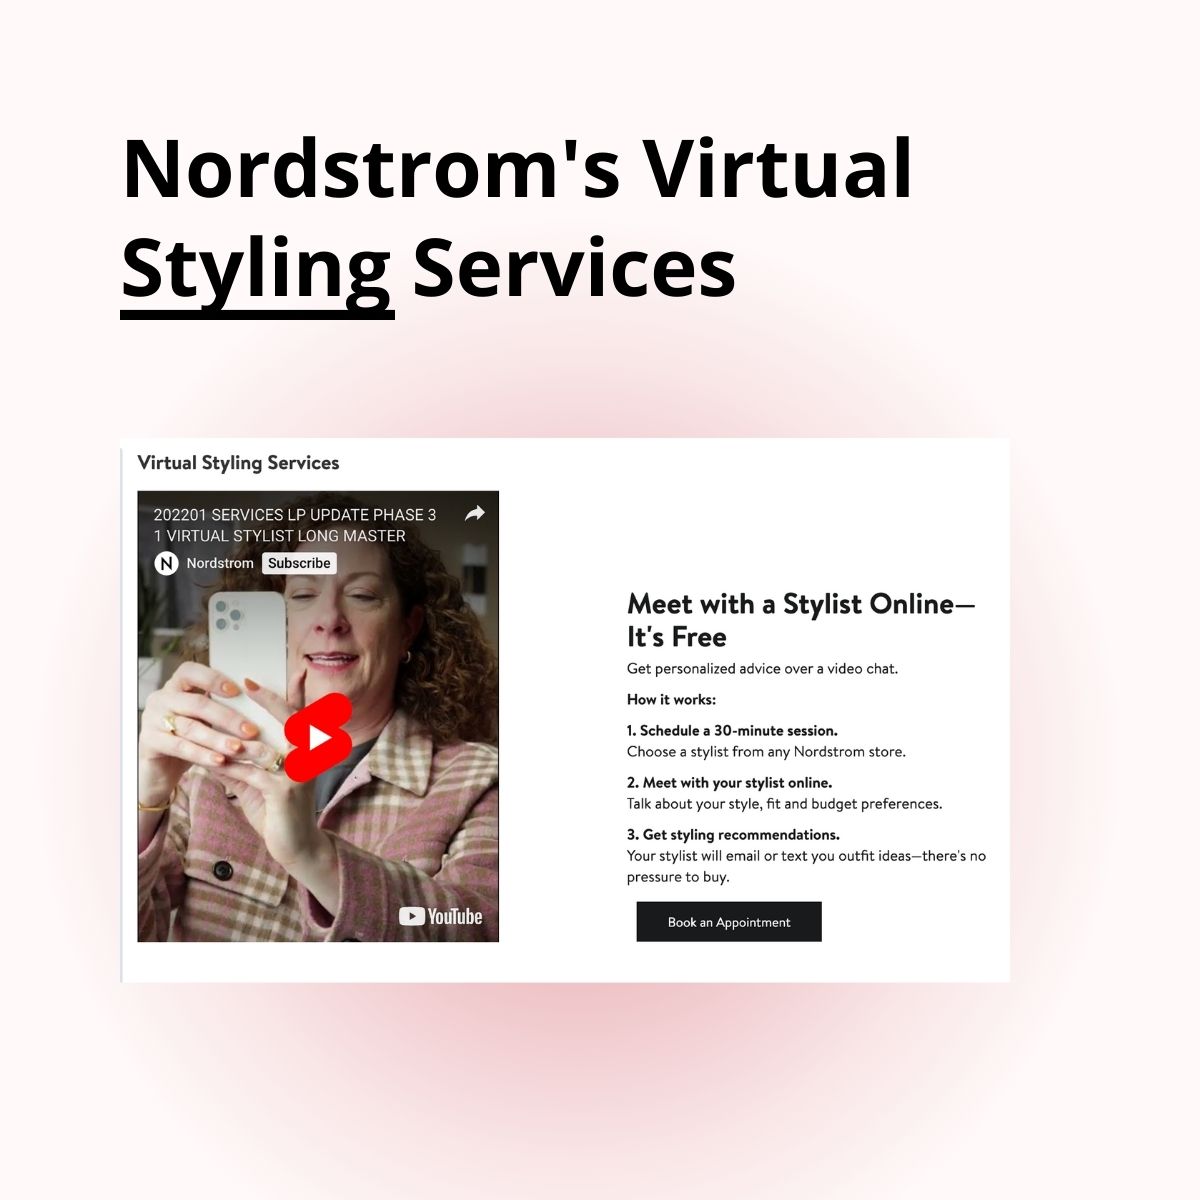 Nordstrom virtual styling services example with pink gradient background